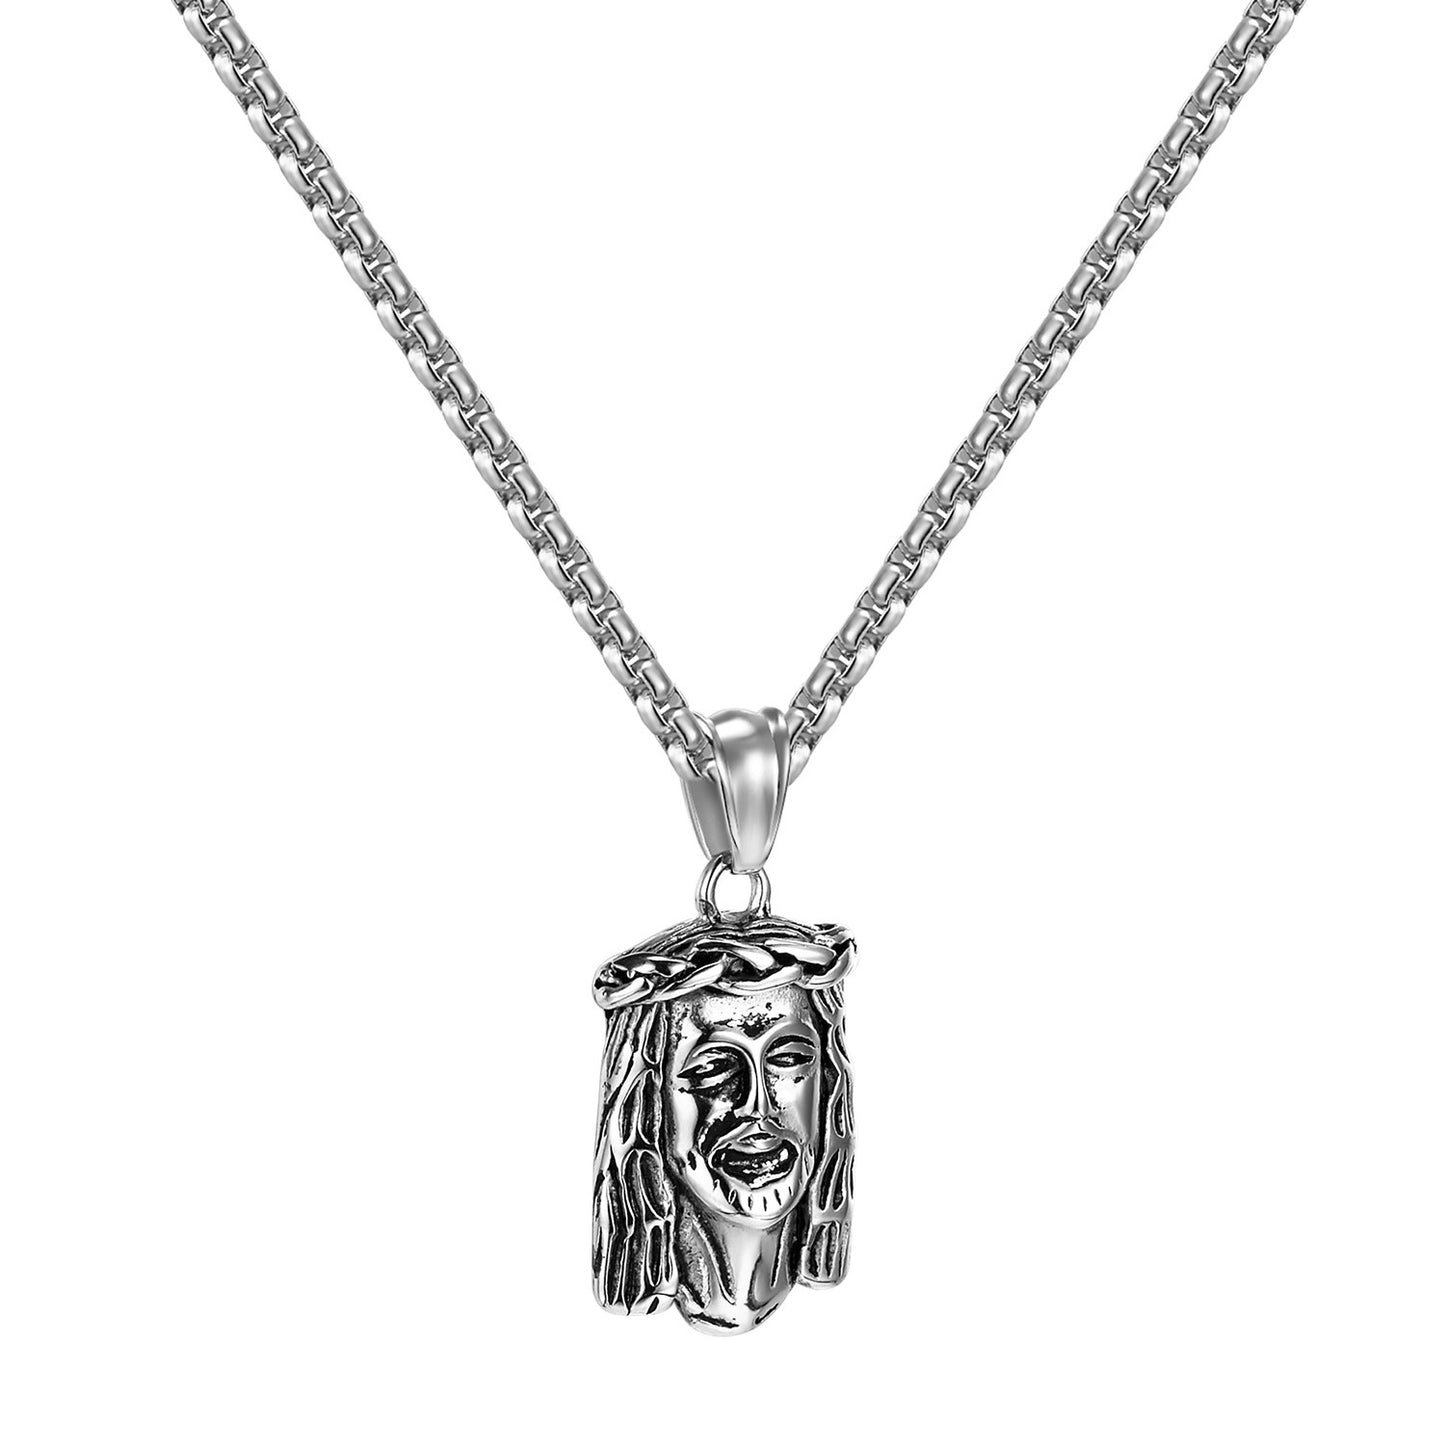 Jesus Christ Face Pendant Free 24" Necklace Stainless Steel